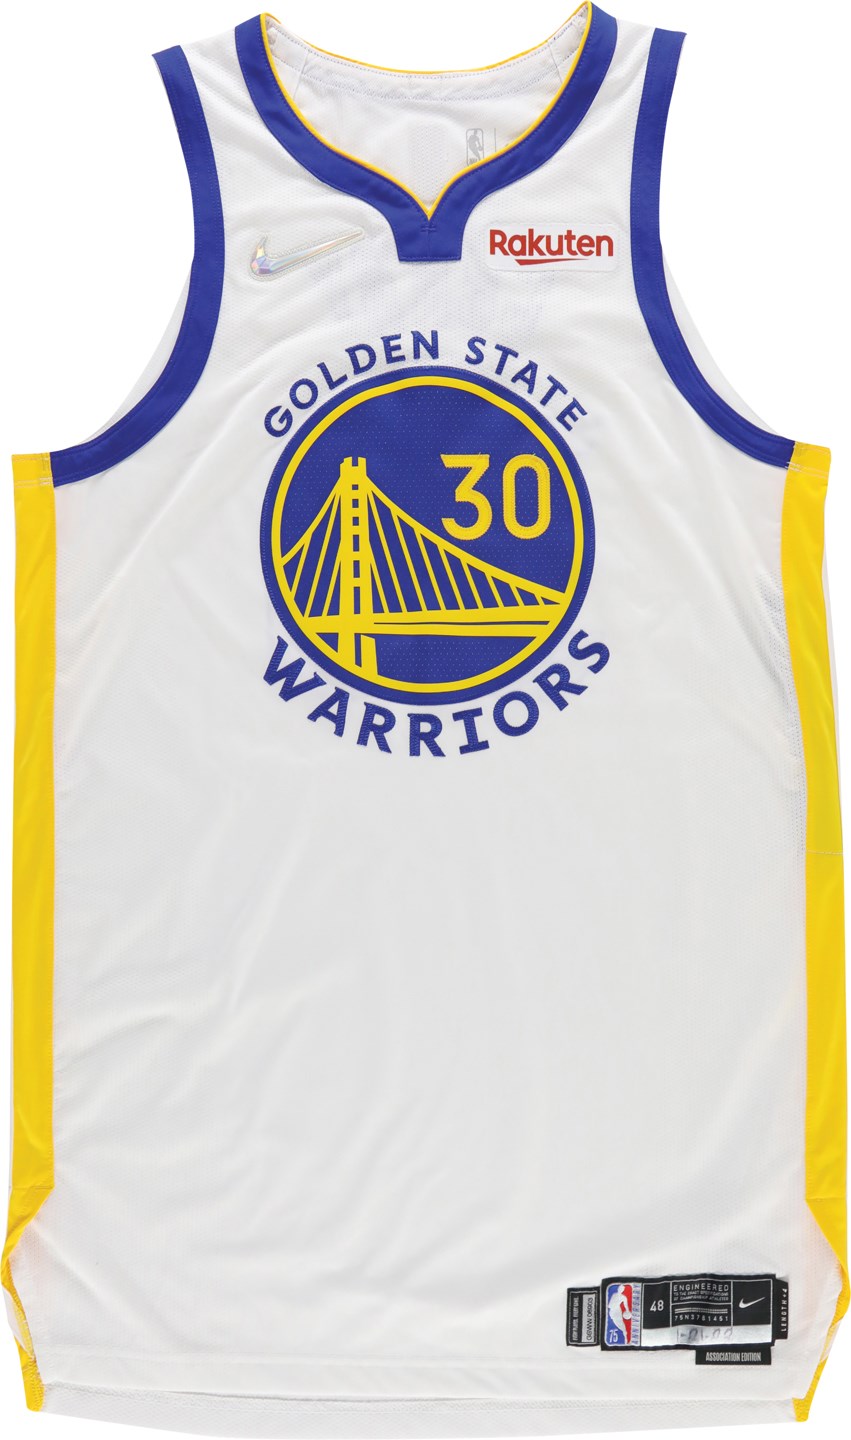 - 022 Stephen Curry Golden State Warriors "Double-Double" Game Worn Jersey from January 21st Victory (MeiGray & Photo-Matched)